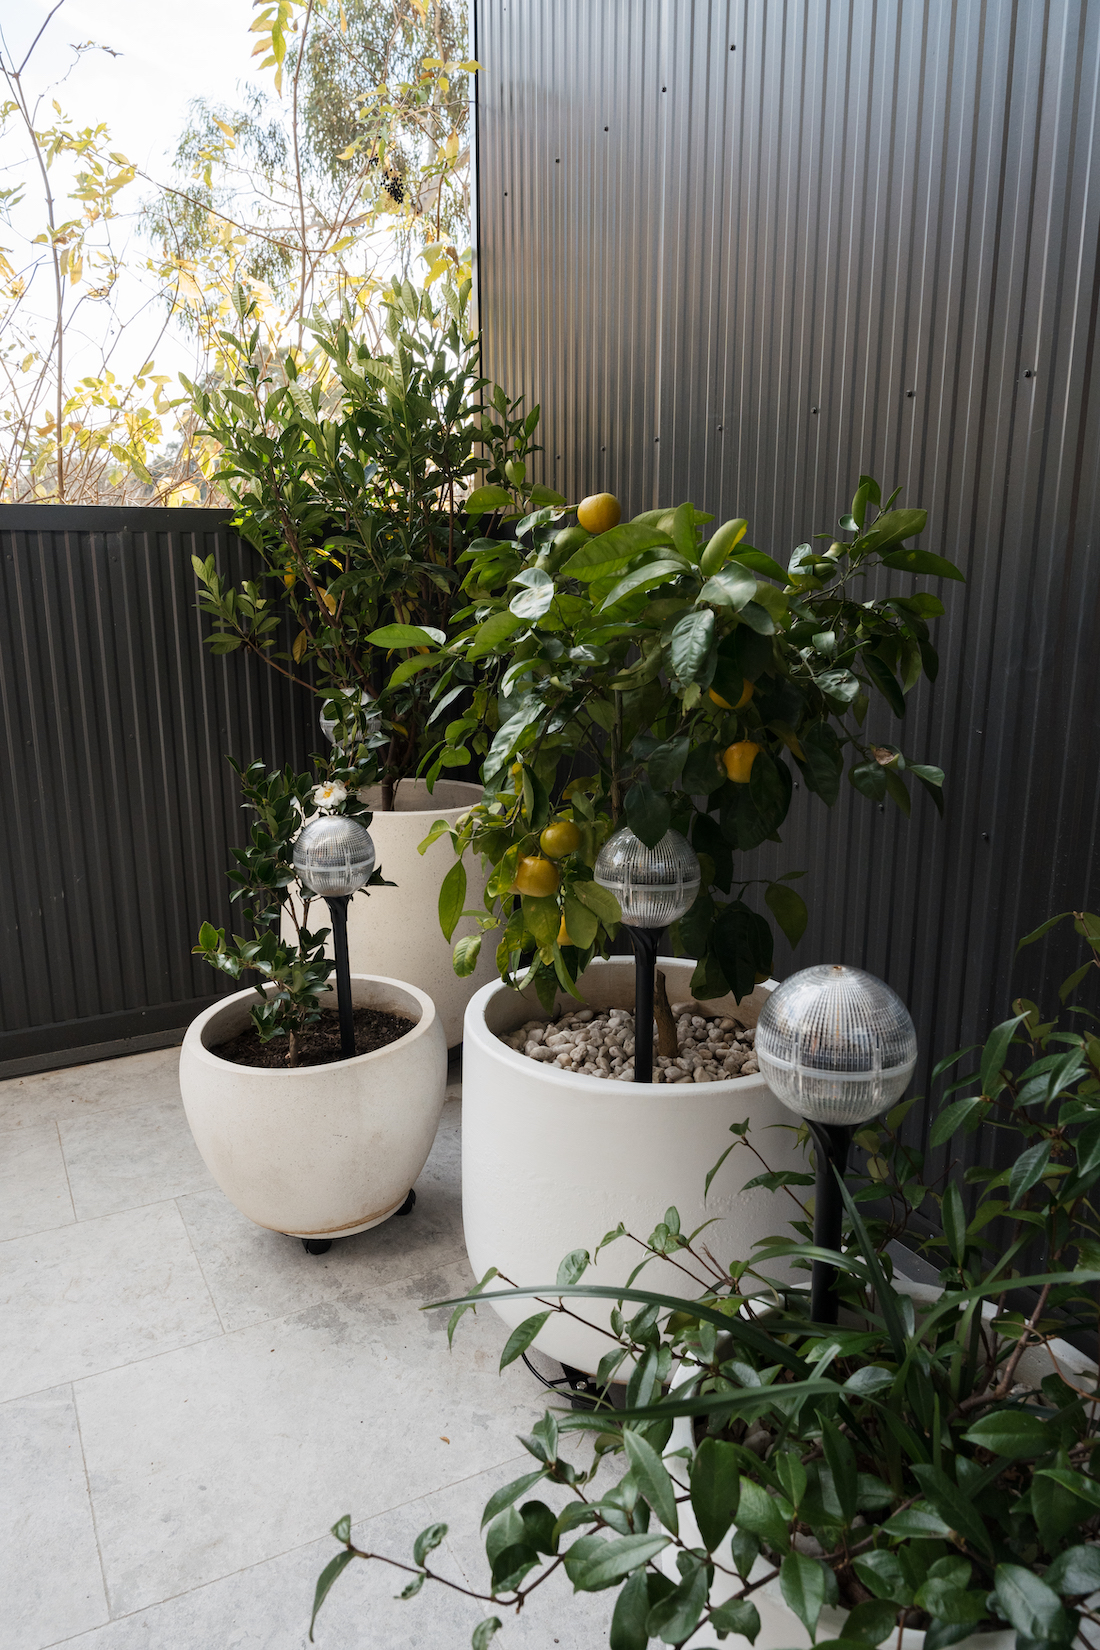 Outdoor pots with solar lights